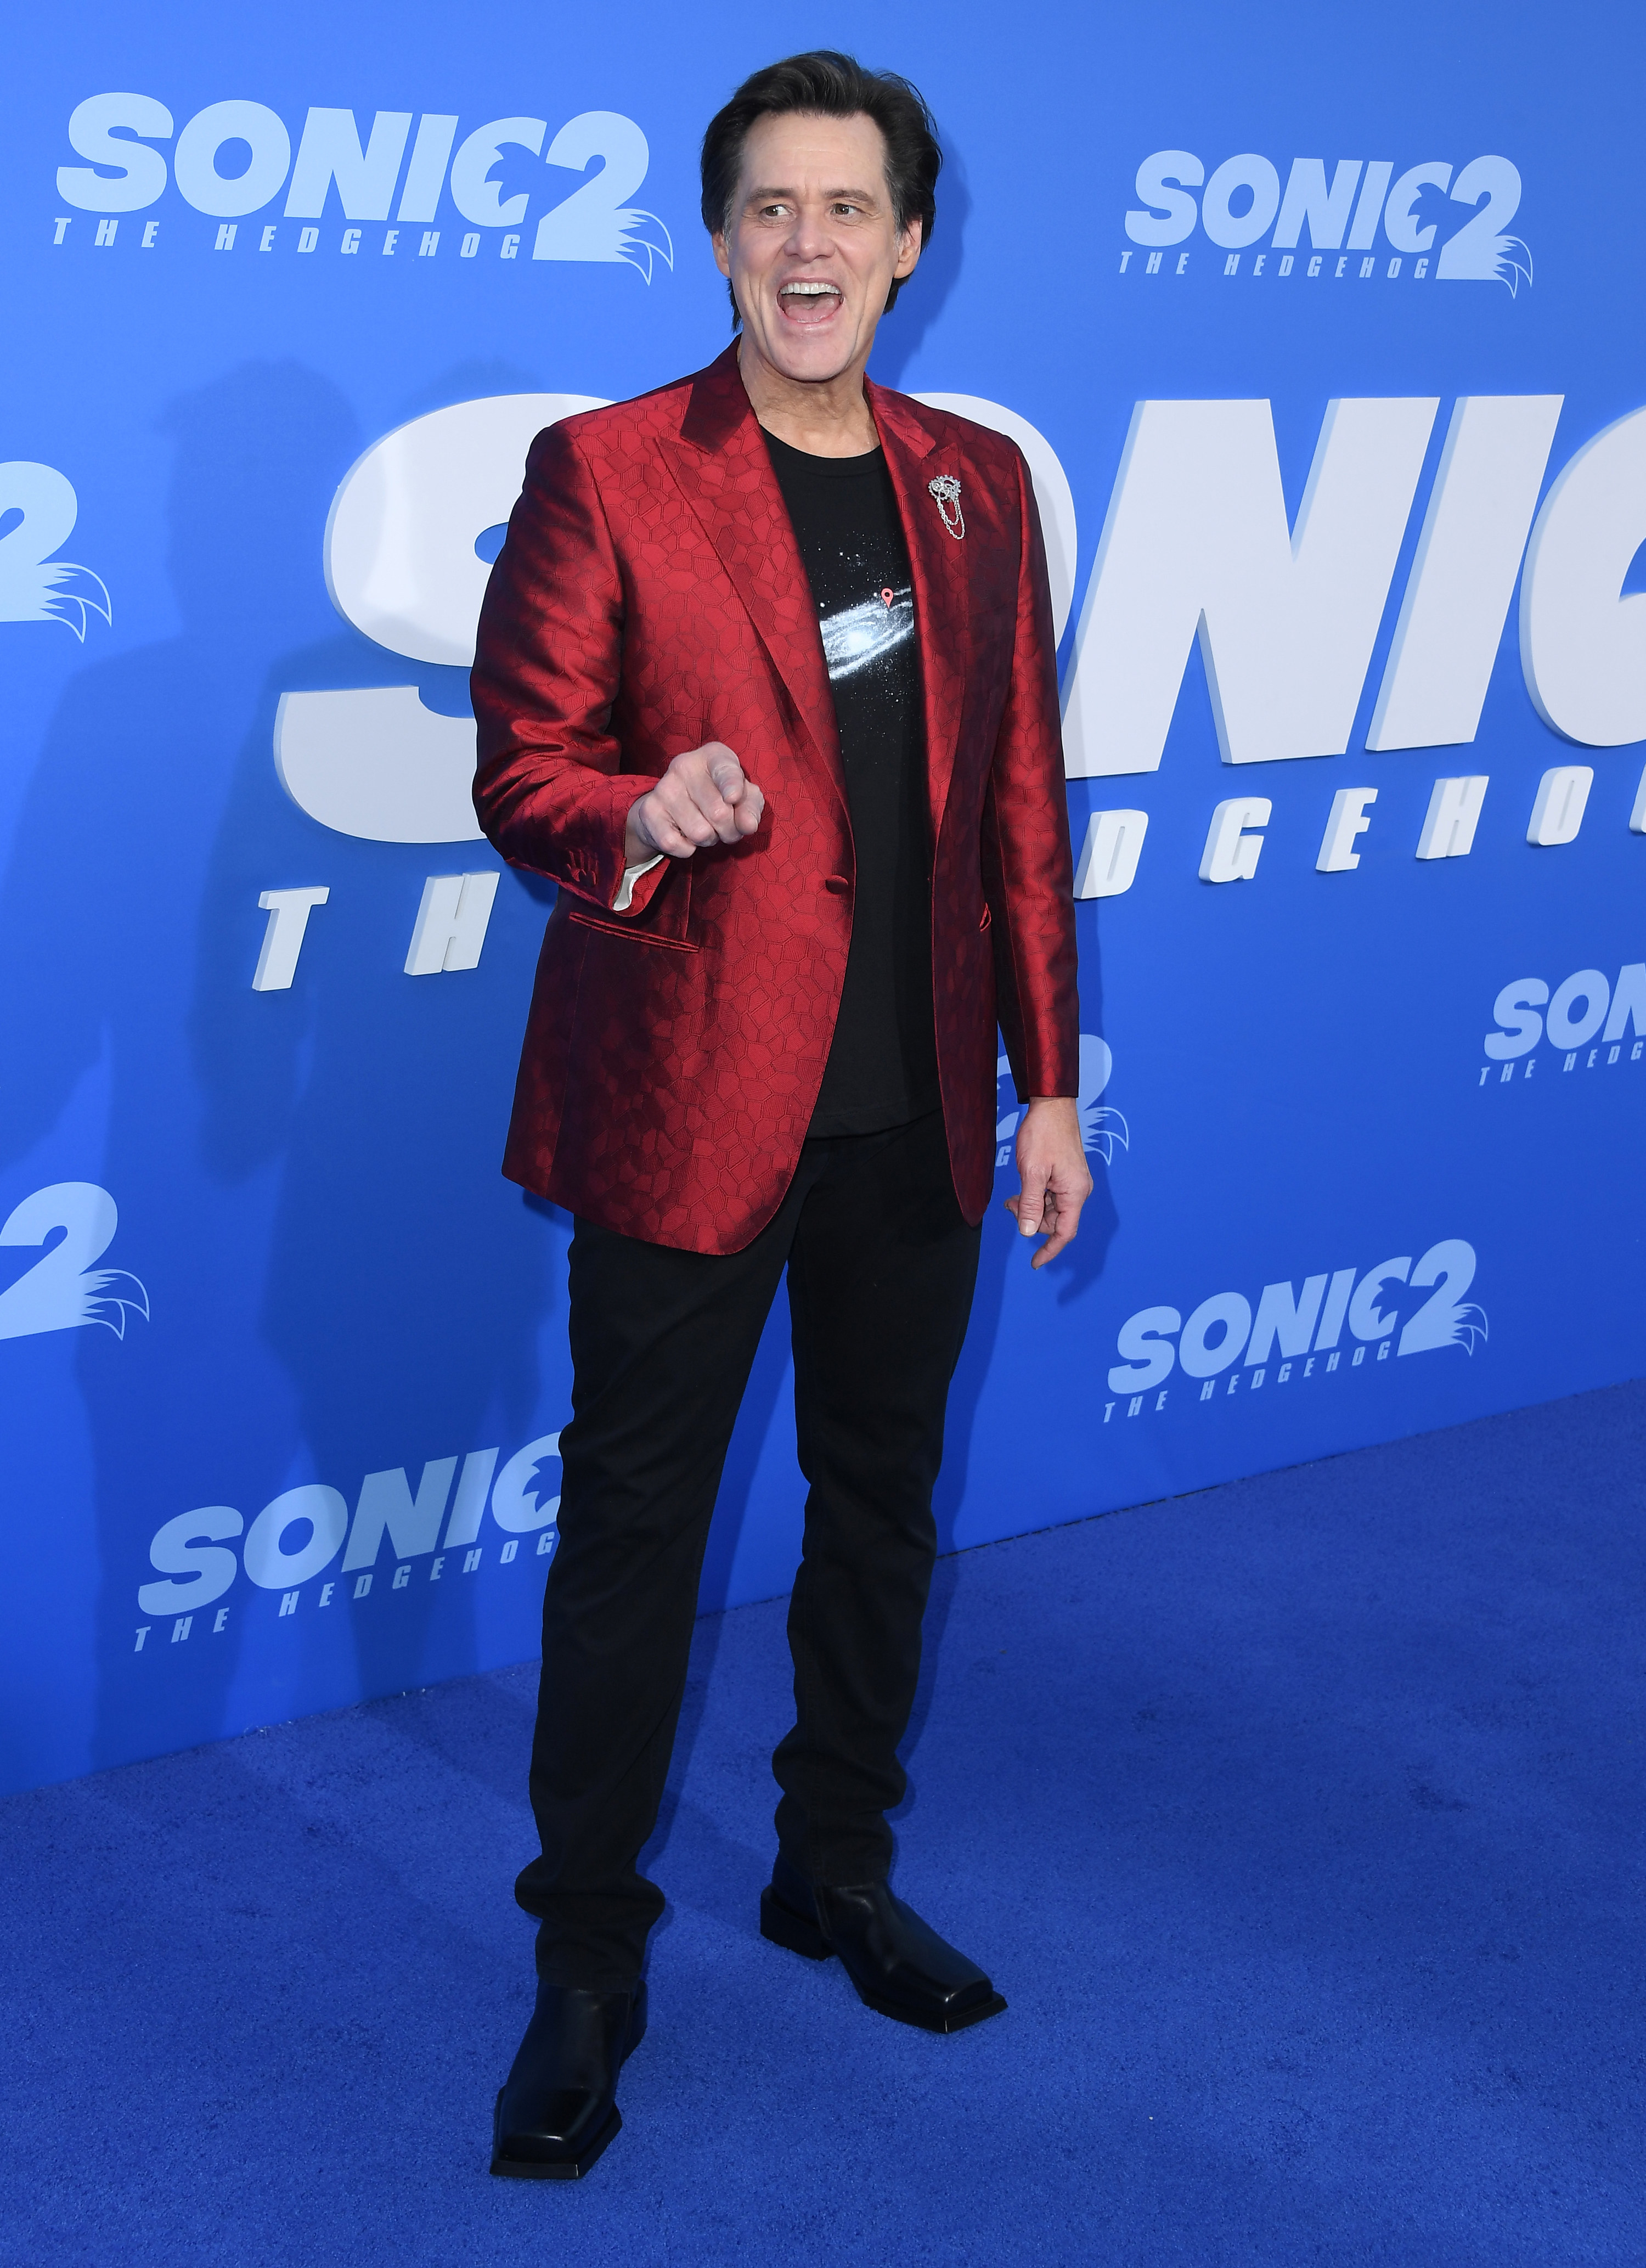 Jim Carrey at a Sonic the Hedgehog 2 premiere